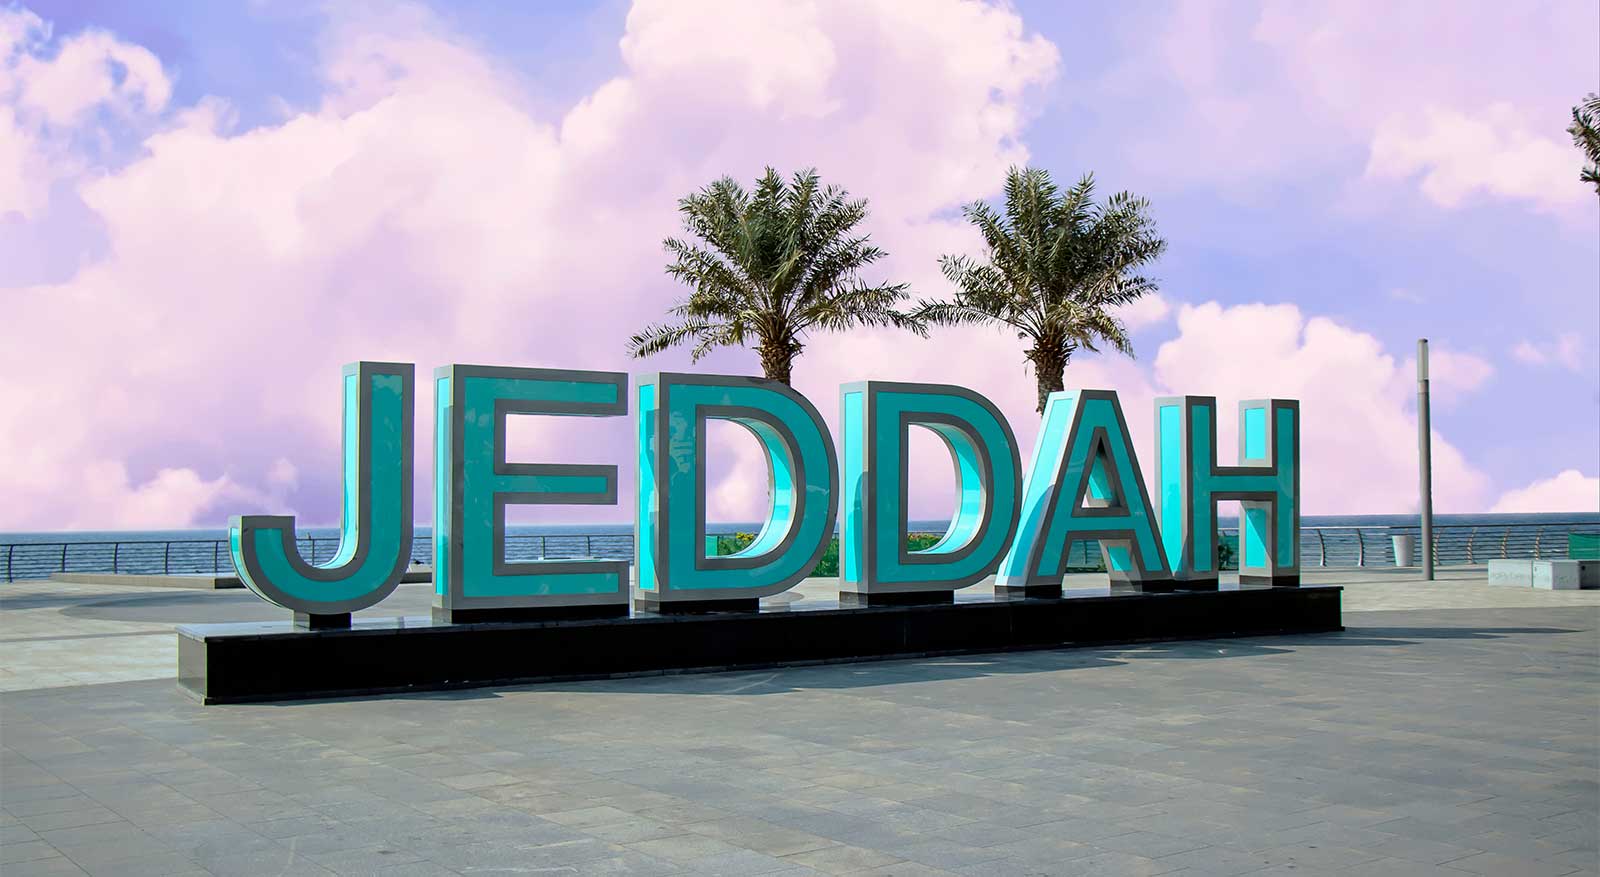 A view from the Jeddah Sign (Image: Shutterstock)